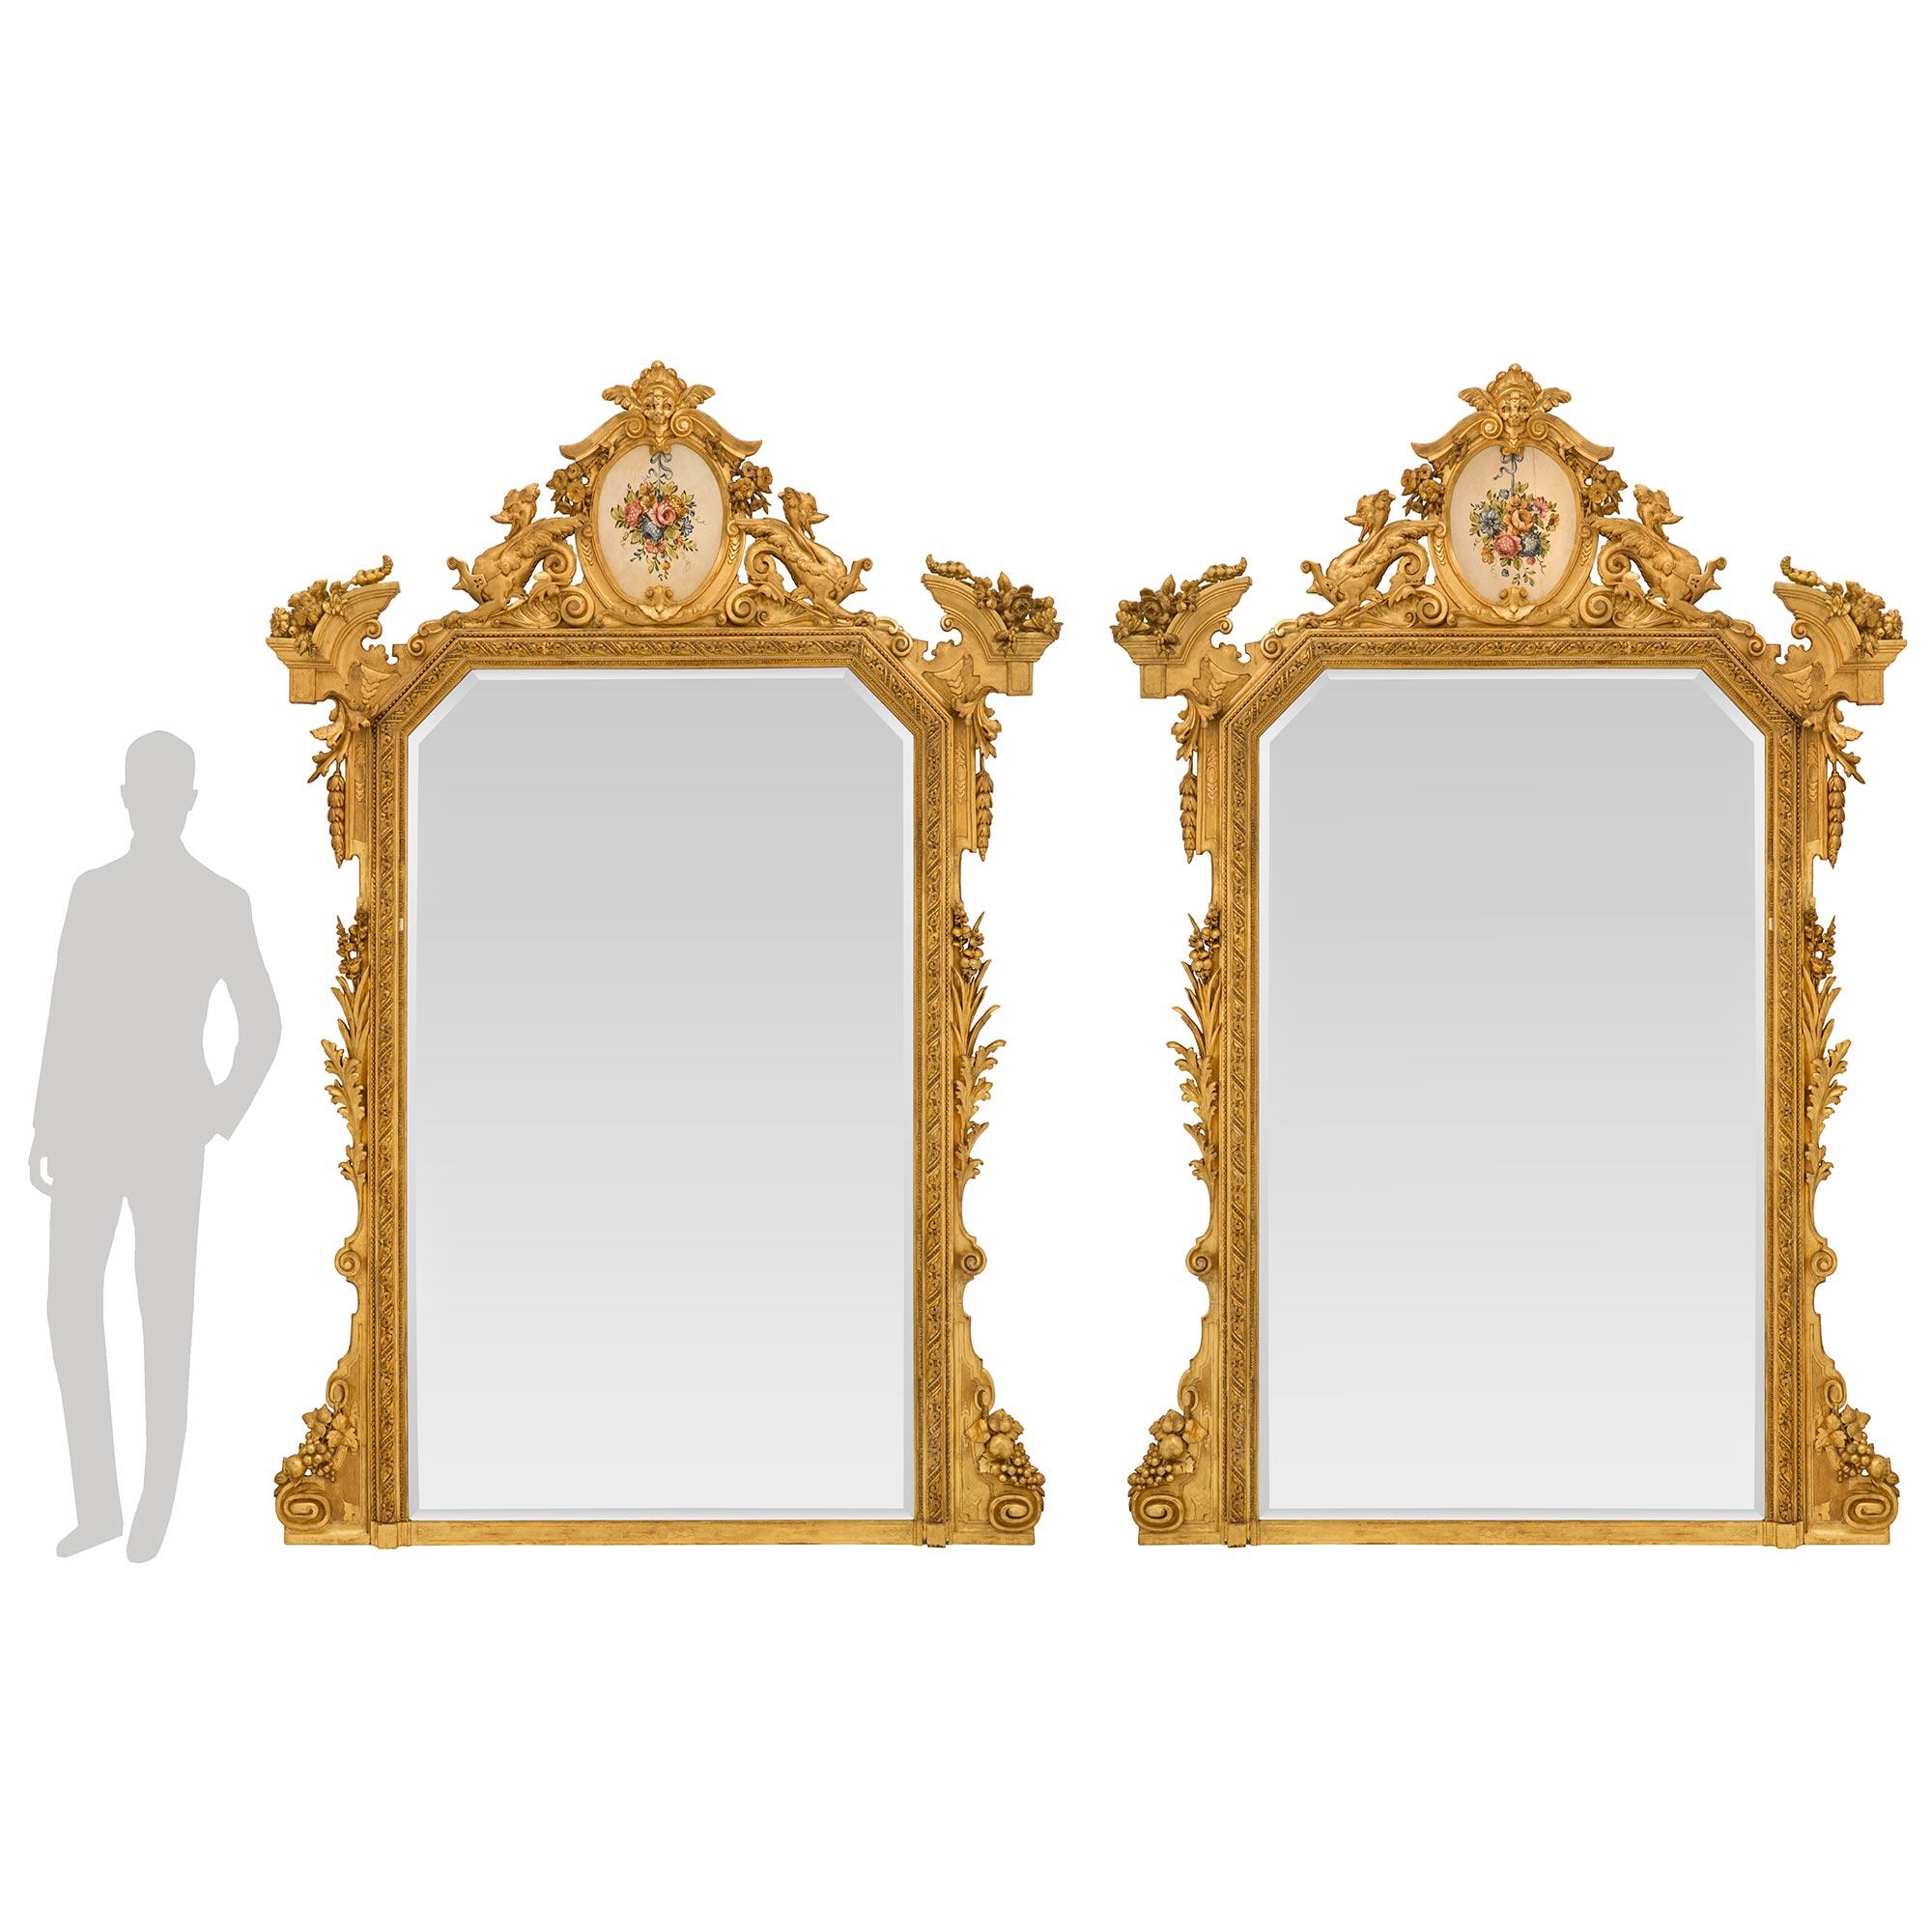 A magnificent and monumentally scaled pair of Italian early 19th century st. giltwood mirrors from the Lombardi region. Each mirror retains its original mirror plate set within a most elegant mottled frame with finely detailed Les Oves patterns,